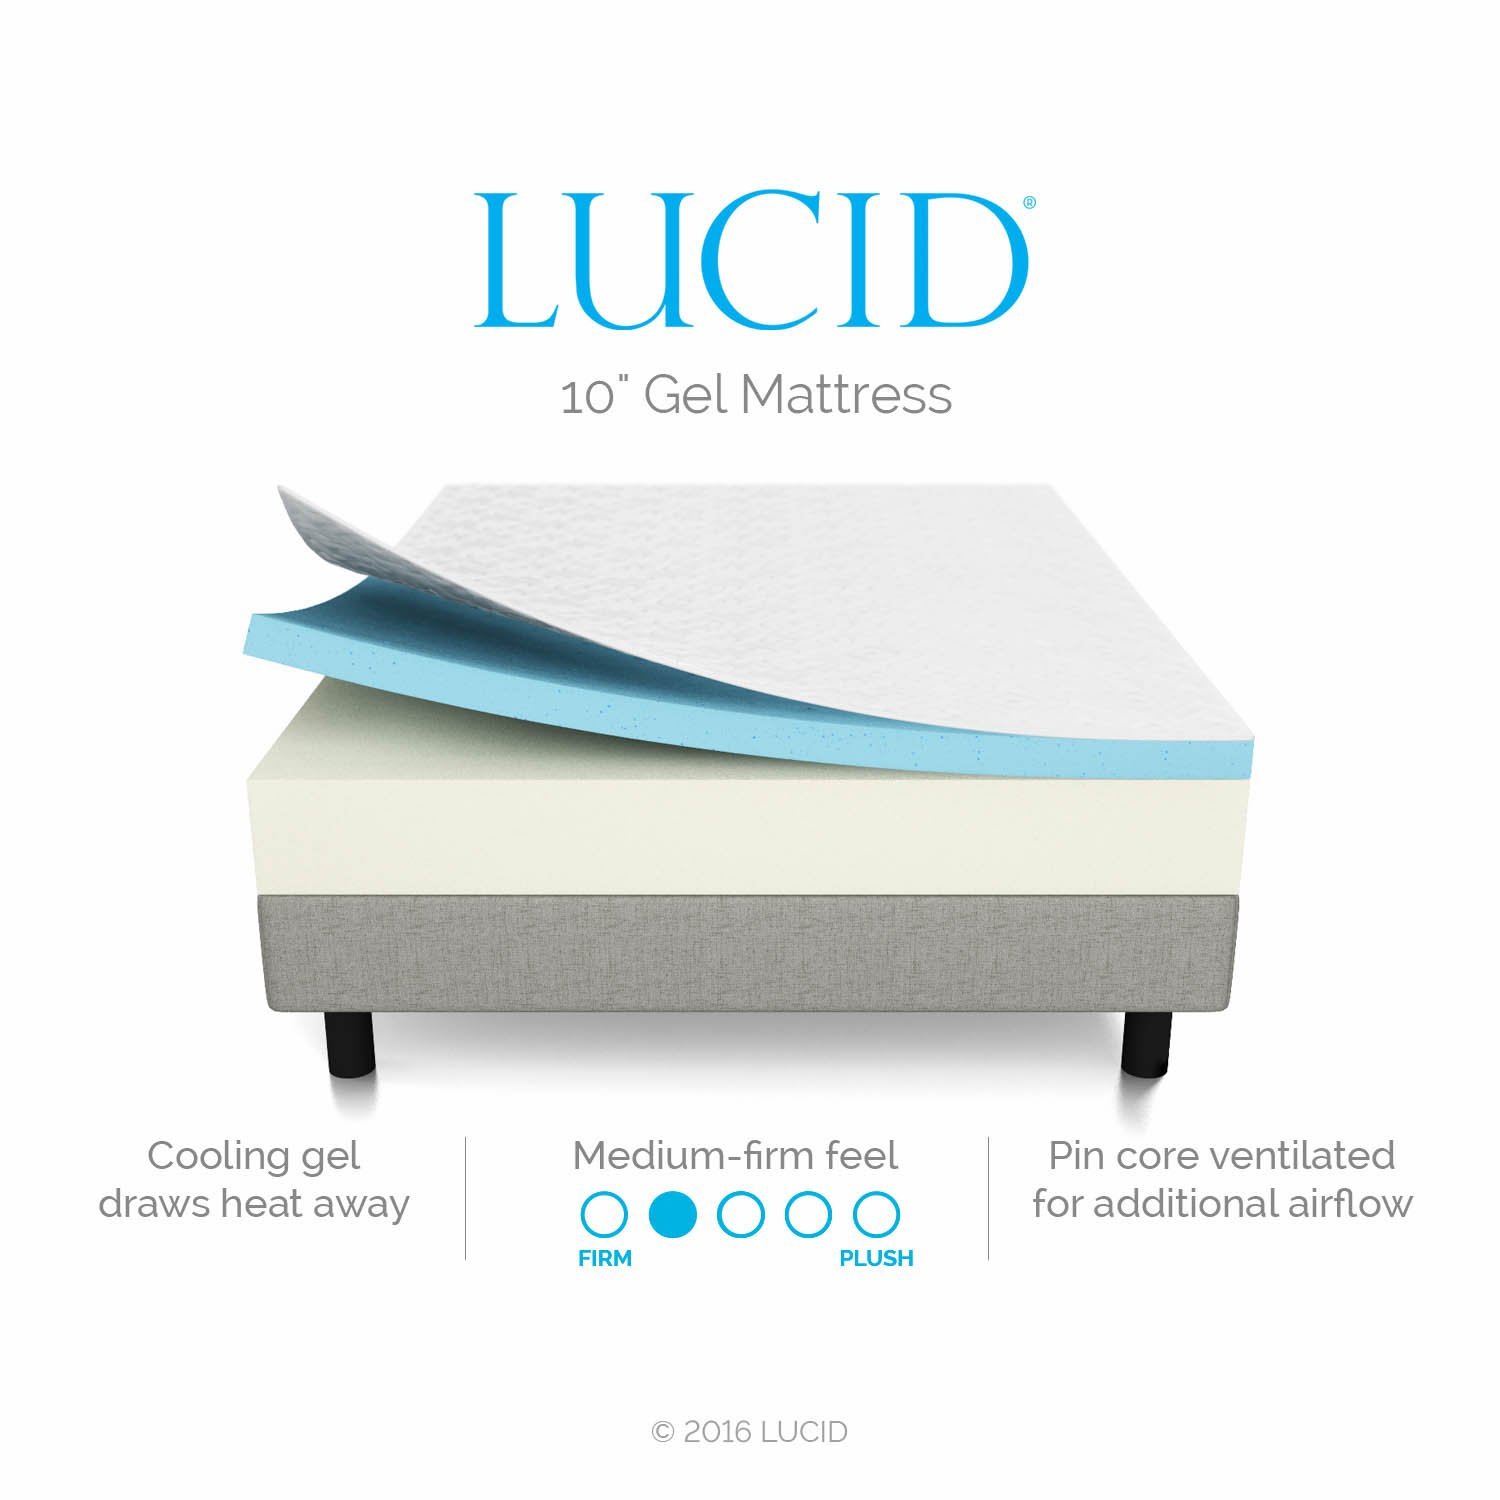 Lucid Vs Tuft and Needle Mattress Review - Firmness and Motion Isolation